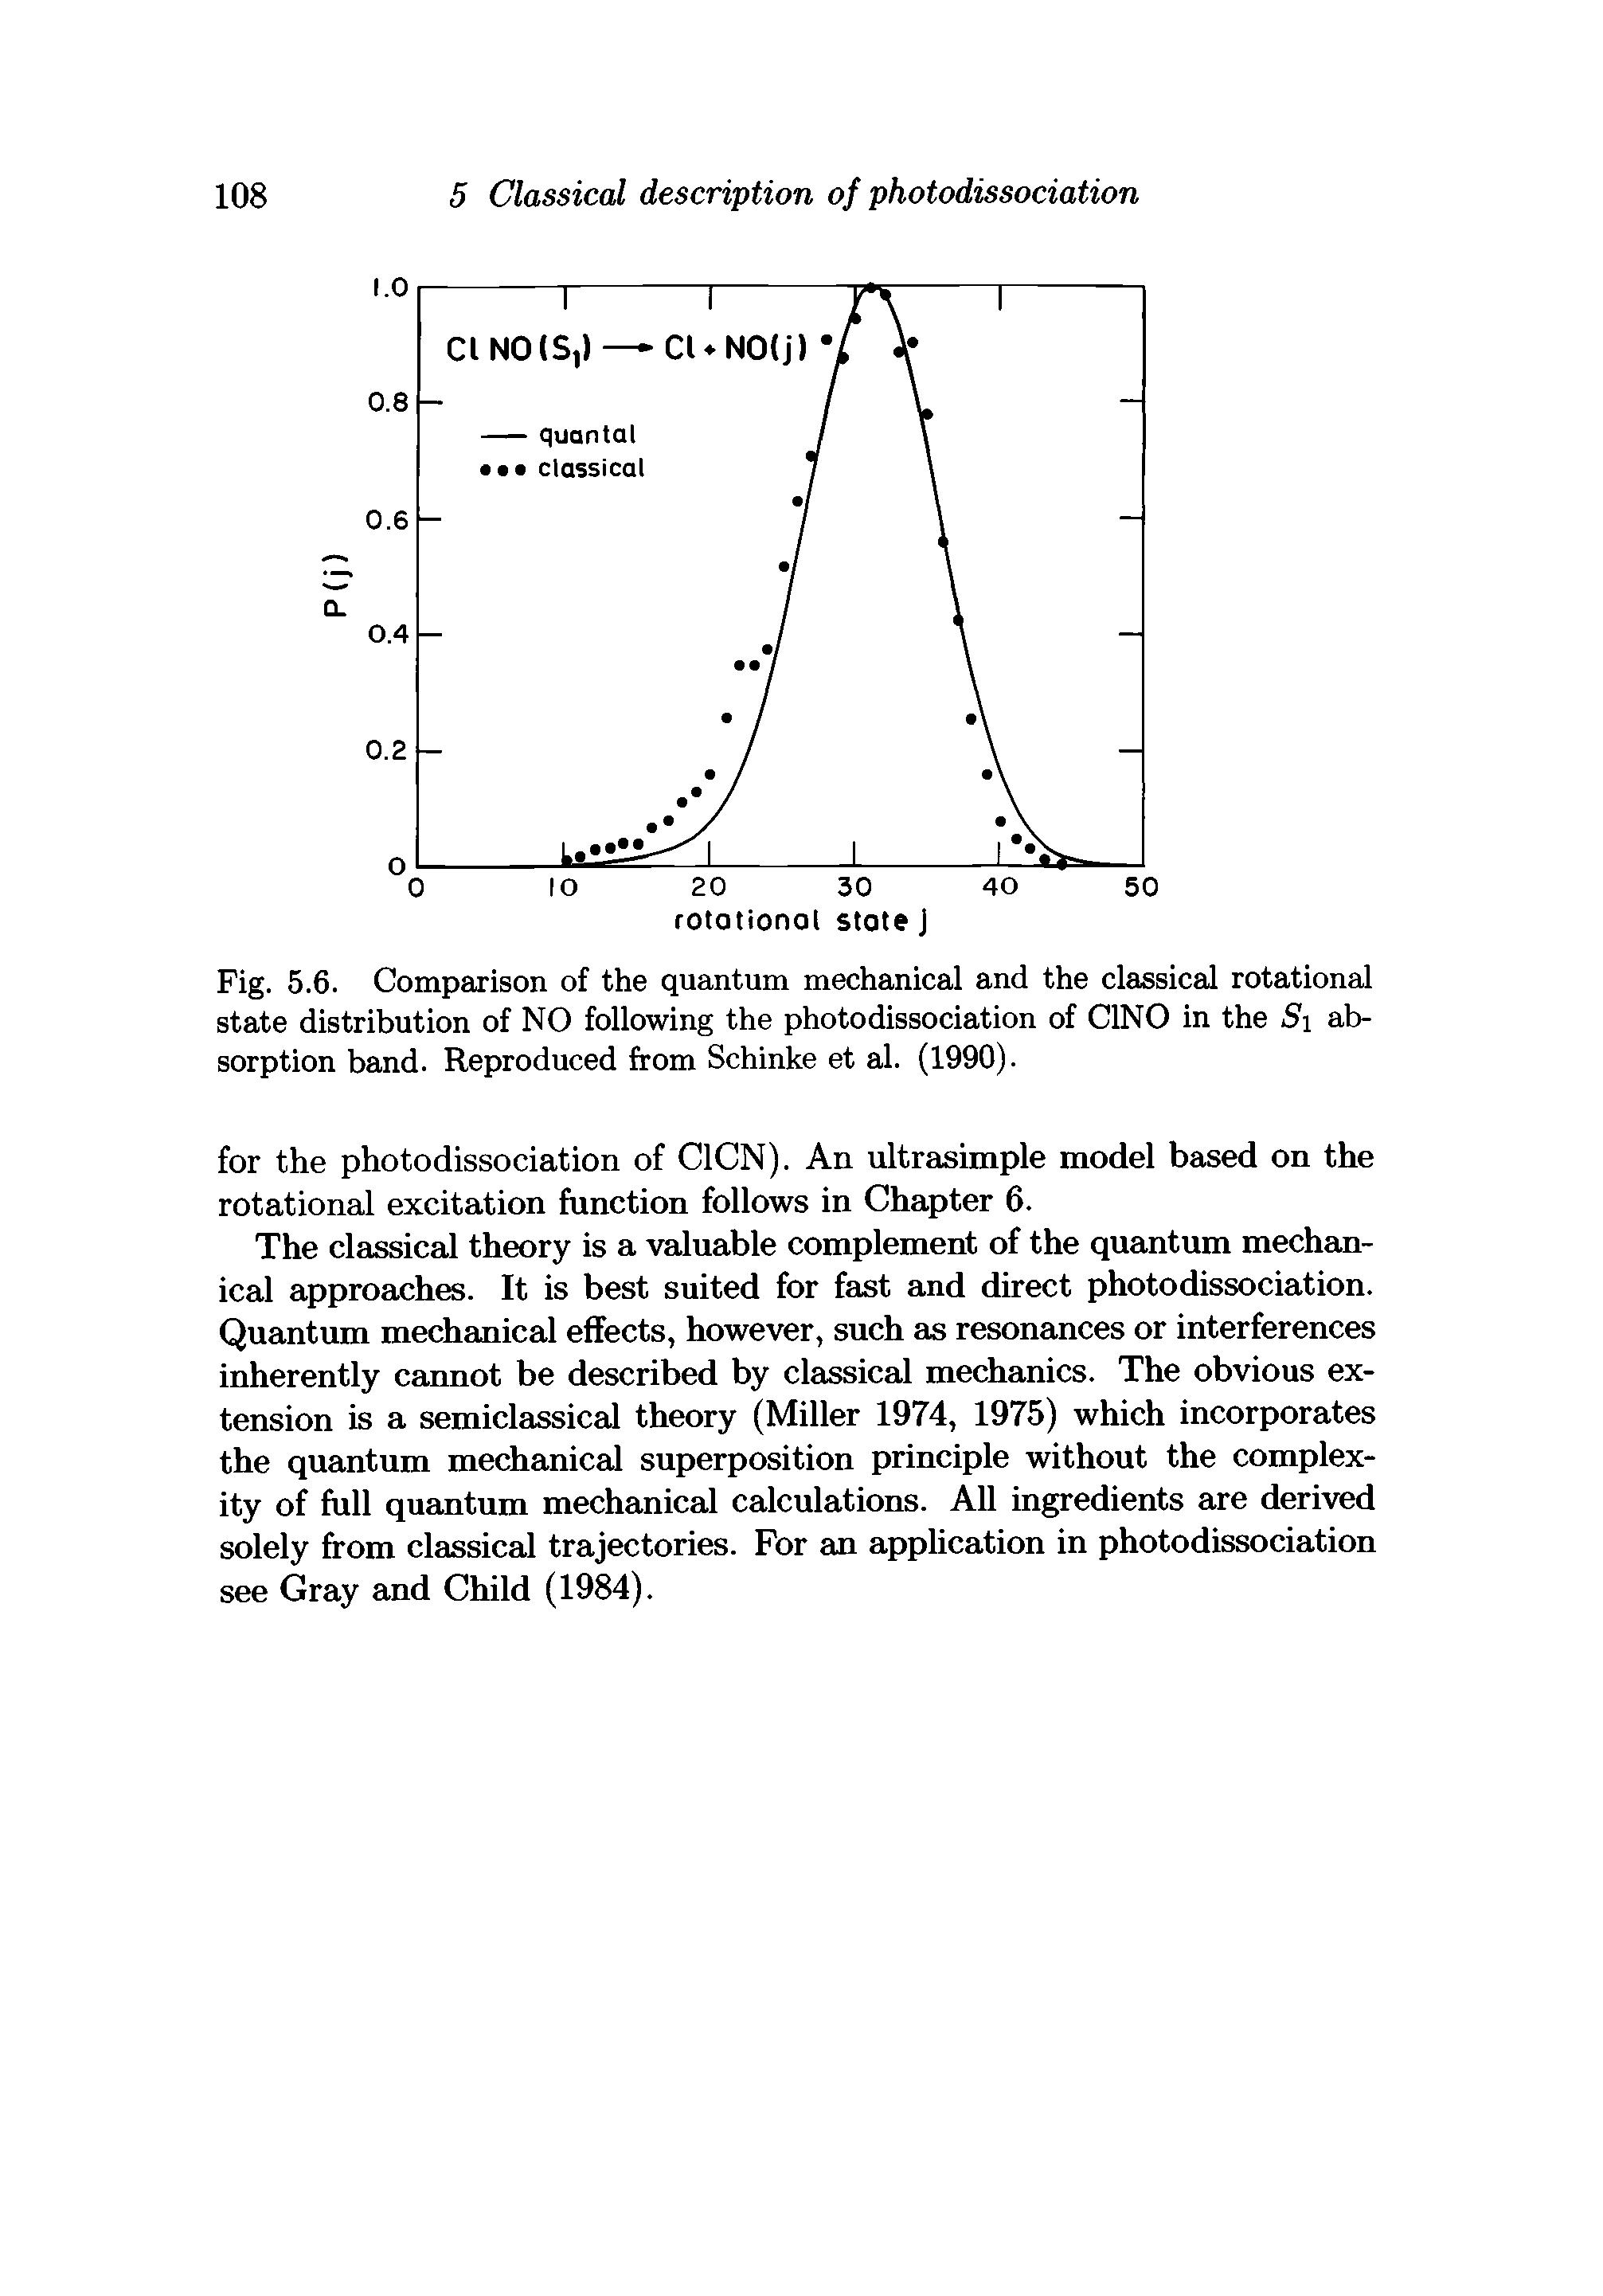 Fig. 5.6. Comparison of the quantum mechanical and the classical rotational state distribution of NO following the photodissociation of C1NO in the S absorption band. Reproduced from Schinke et al. (1990).